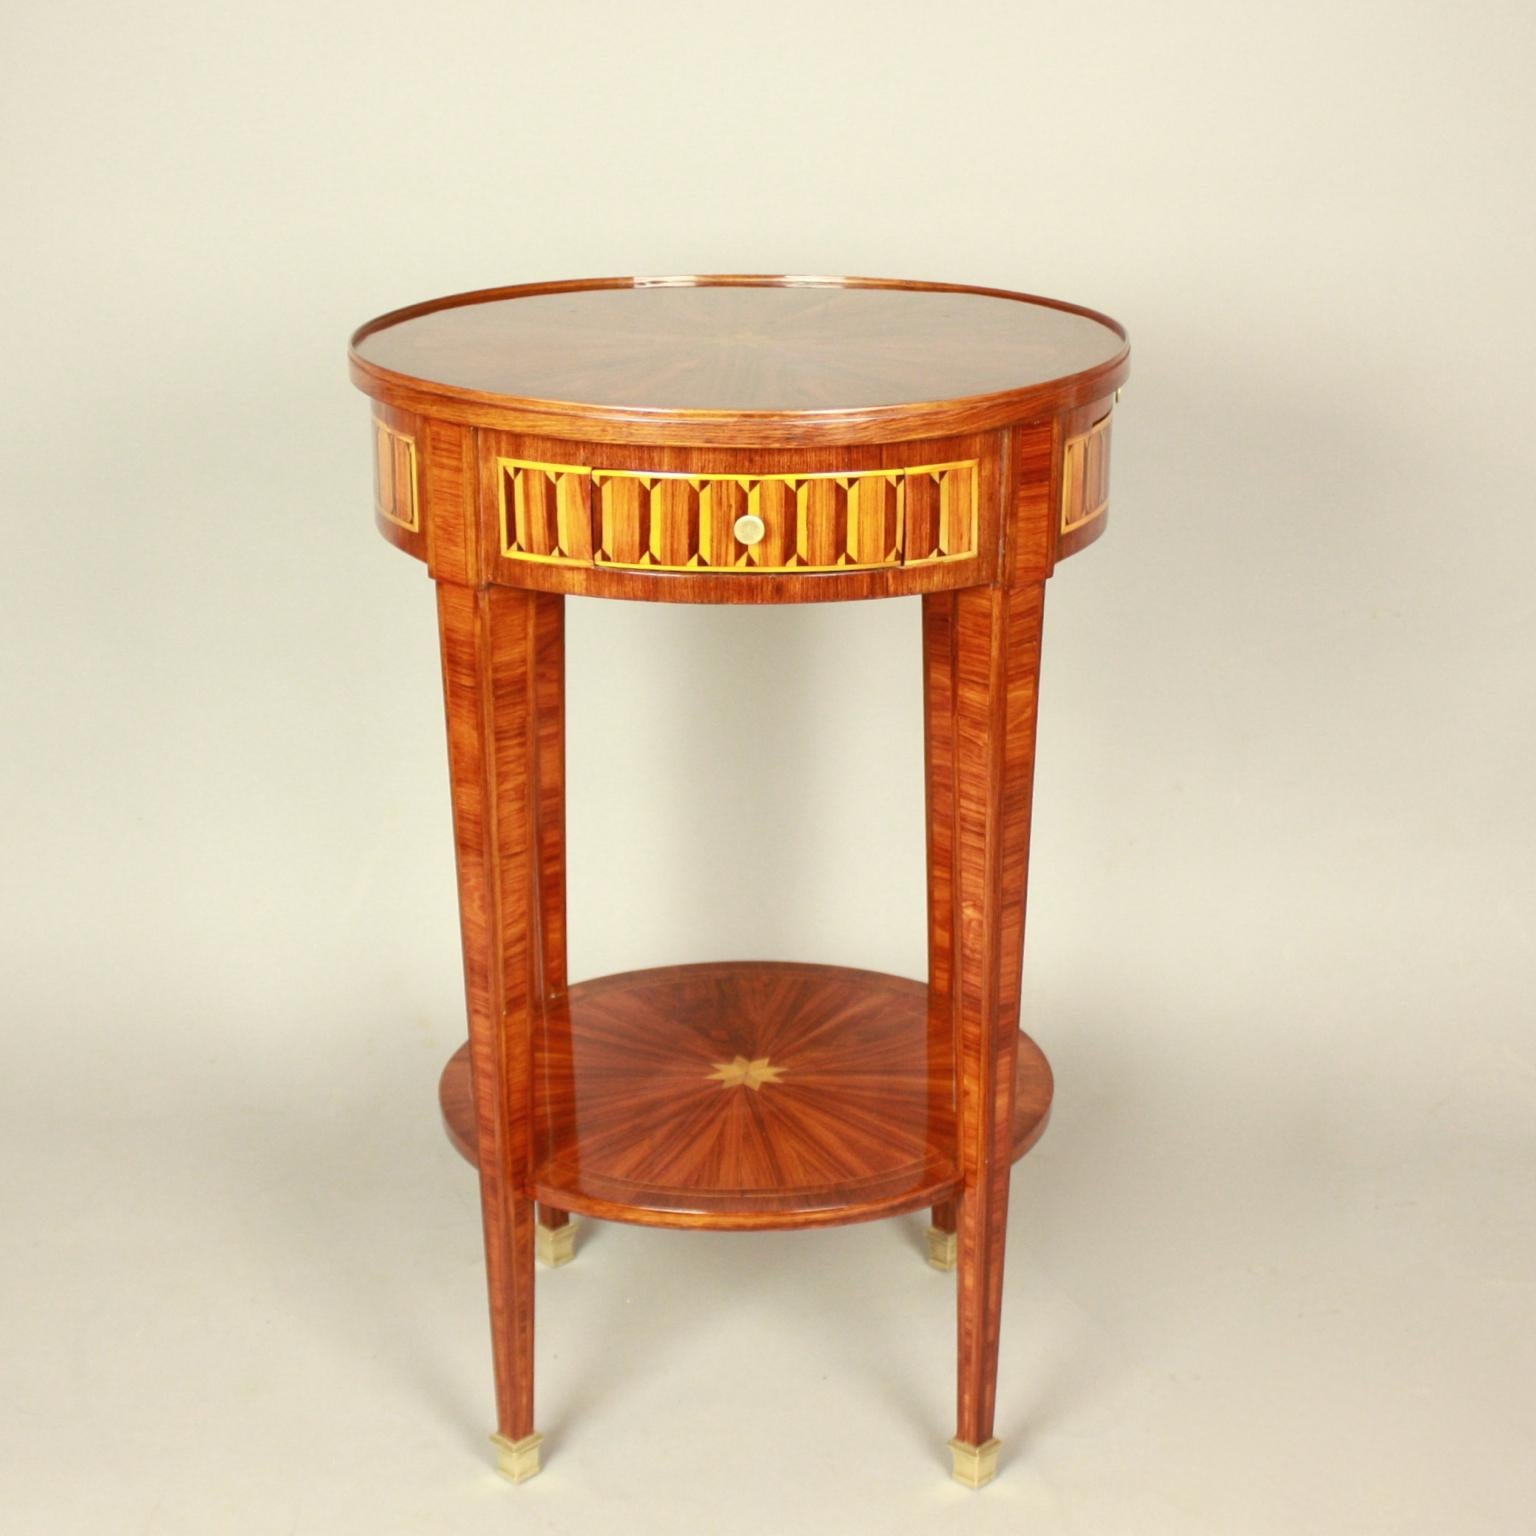 Small French 19th Century Louis XVI Style Marquetry Side Table or Gueridon

A small Louis XVI style marquetry side table or gueridon with a marquetry top featuring a central star, the frieze section with one drawer and one small candle slide, the